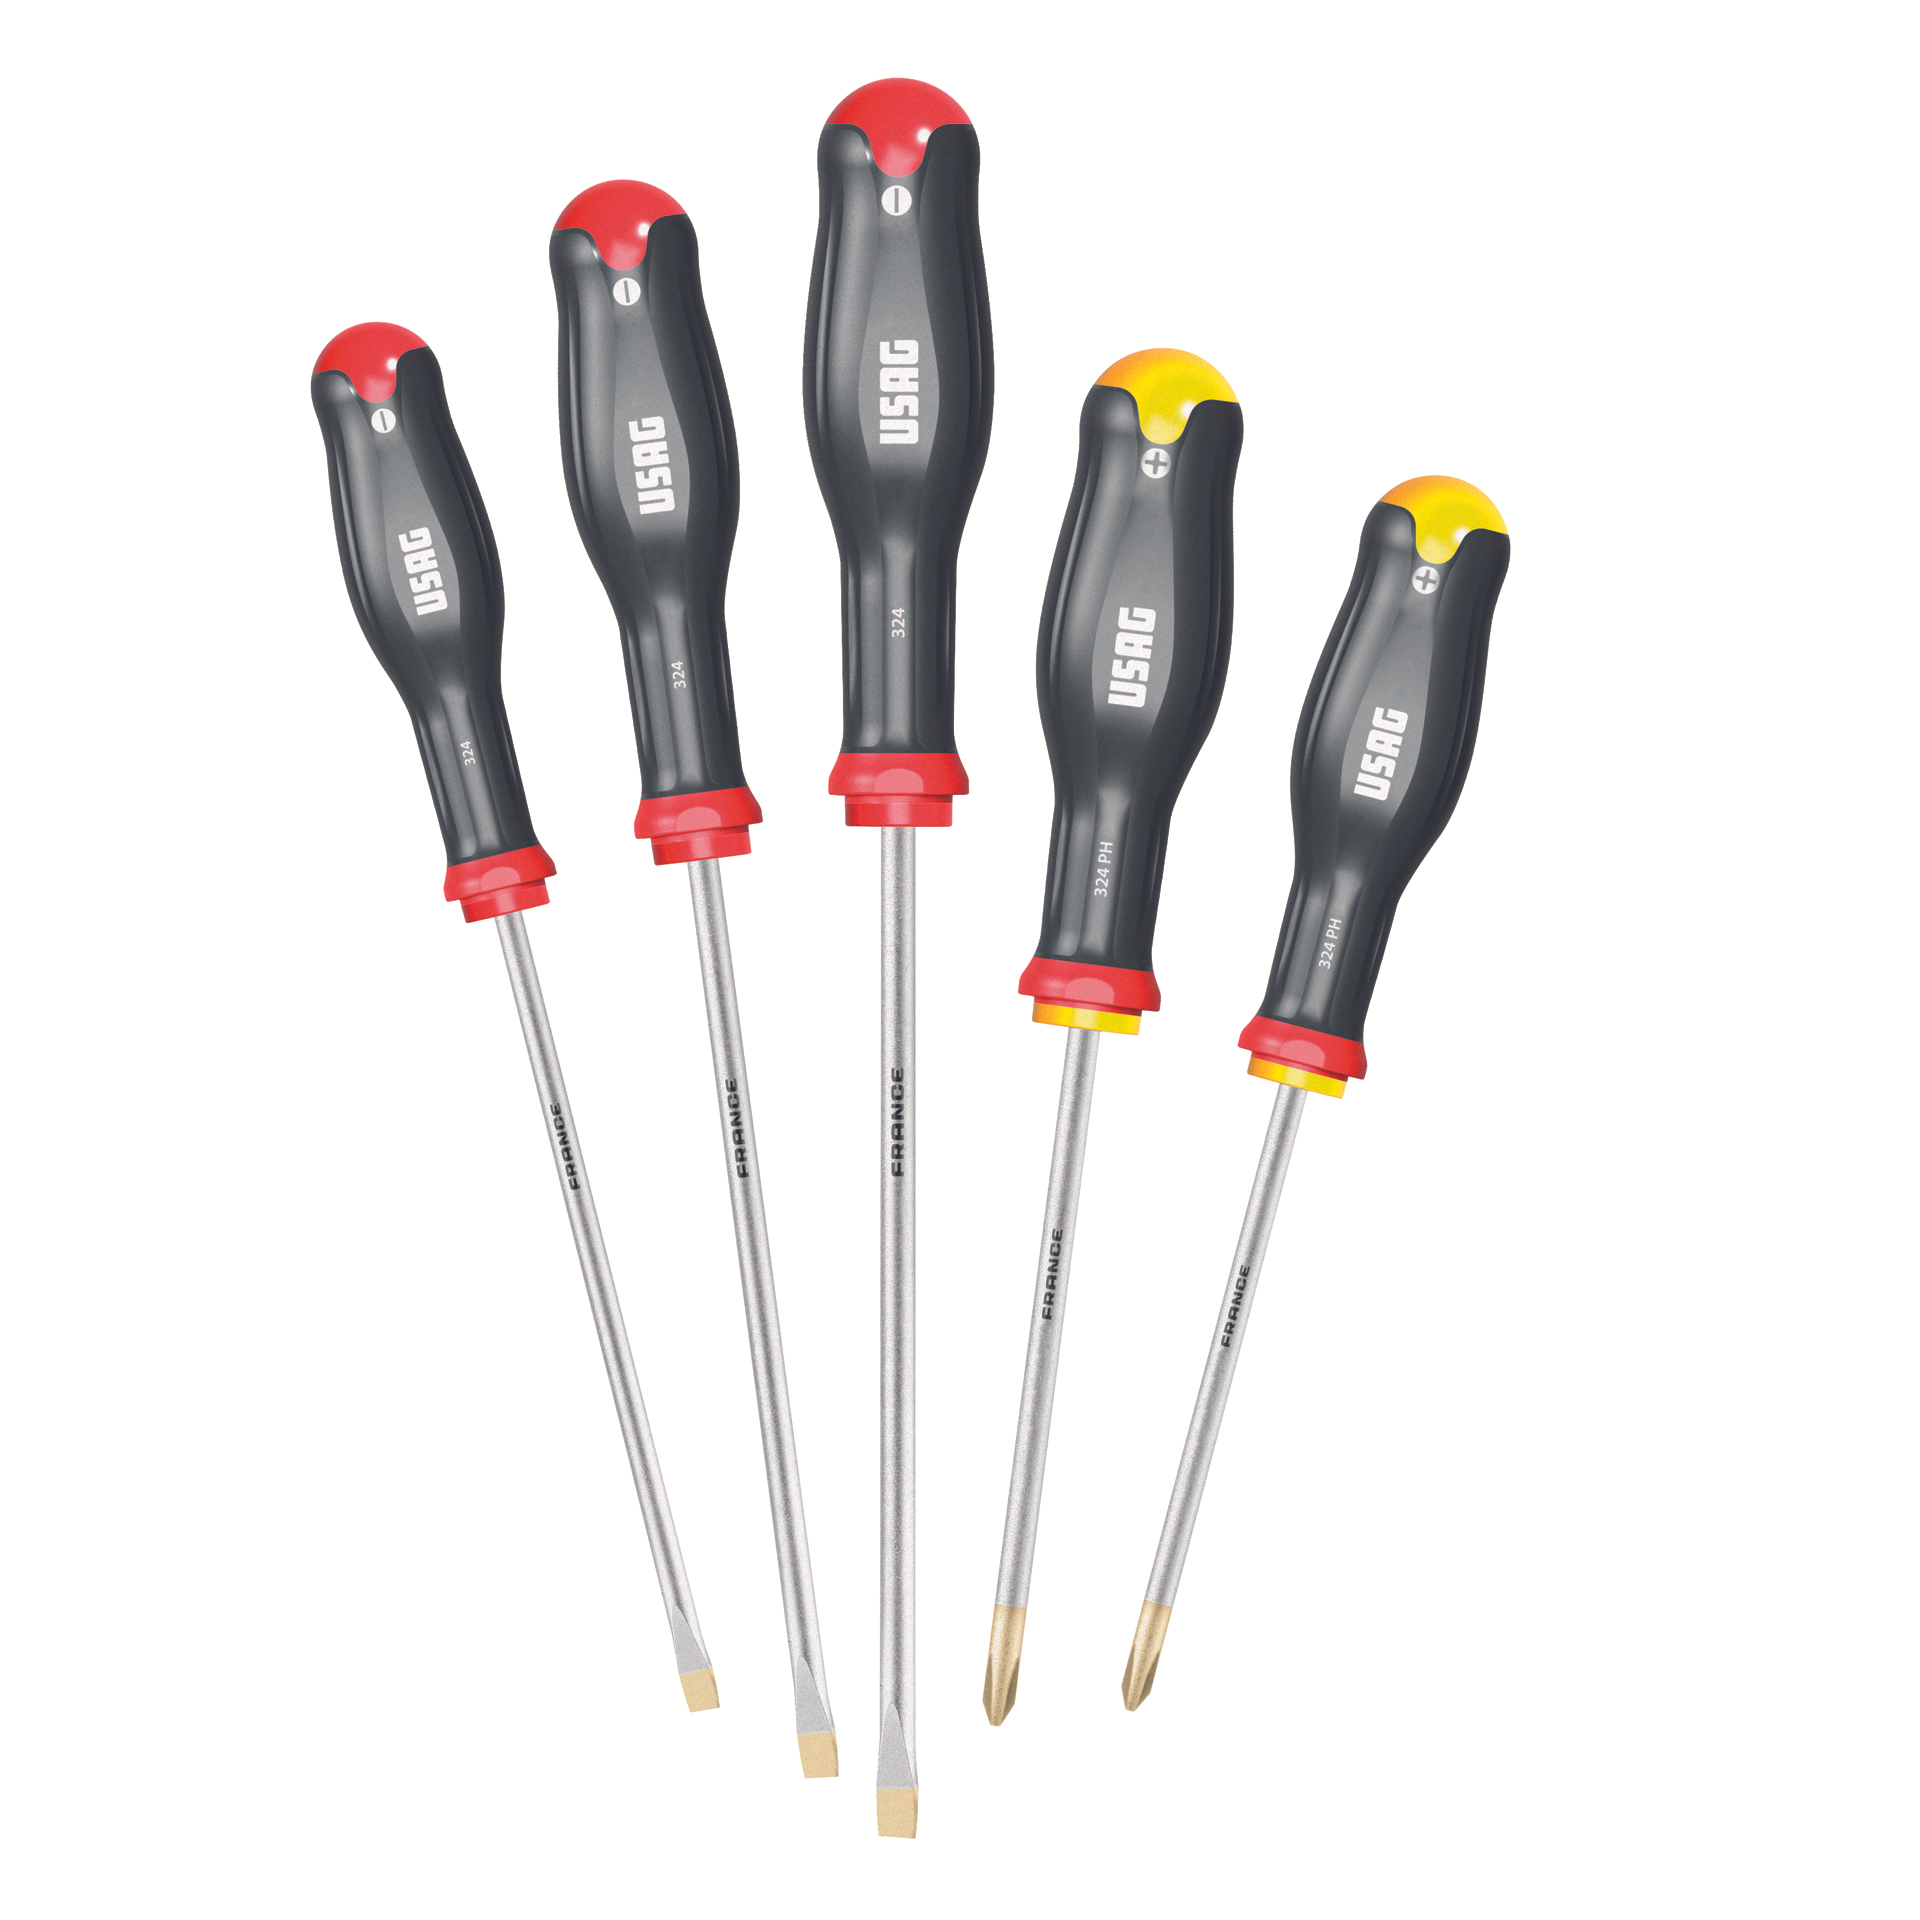 Set of 5 screwdrivers for slot-head and Phillips screws 440gr - Usag 324 SH5